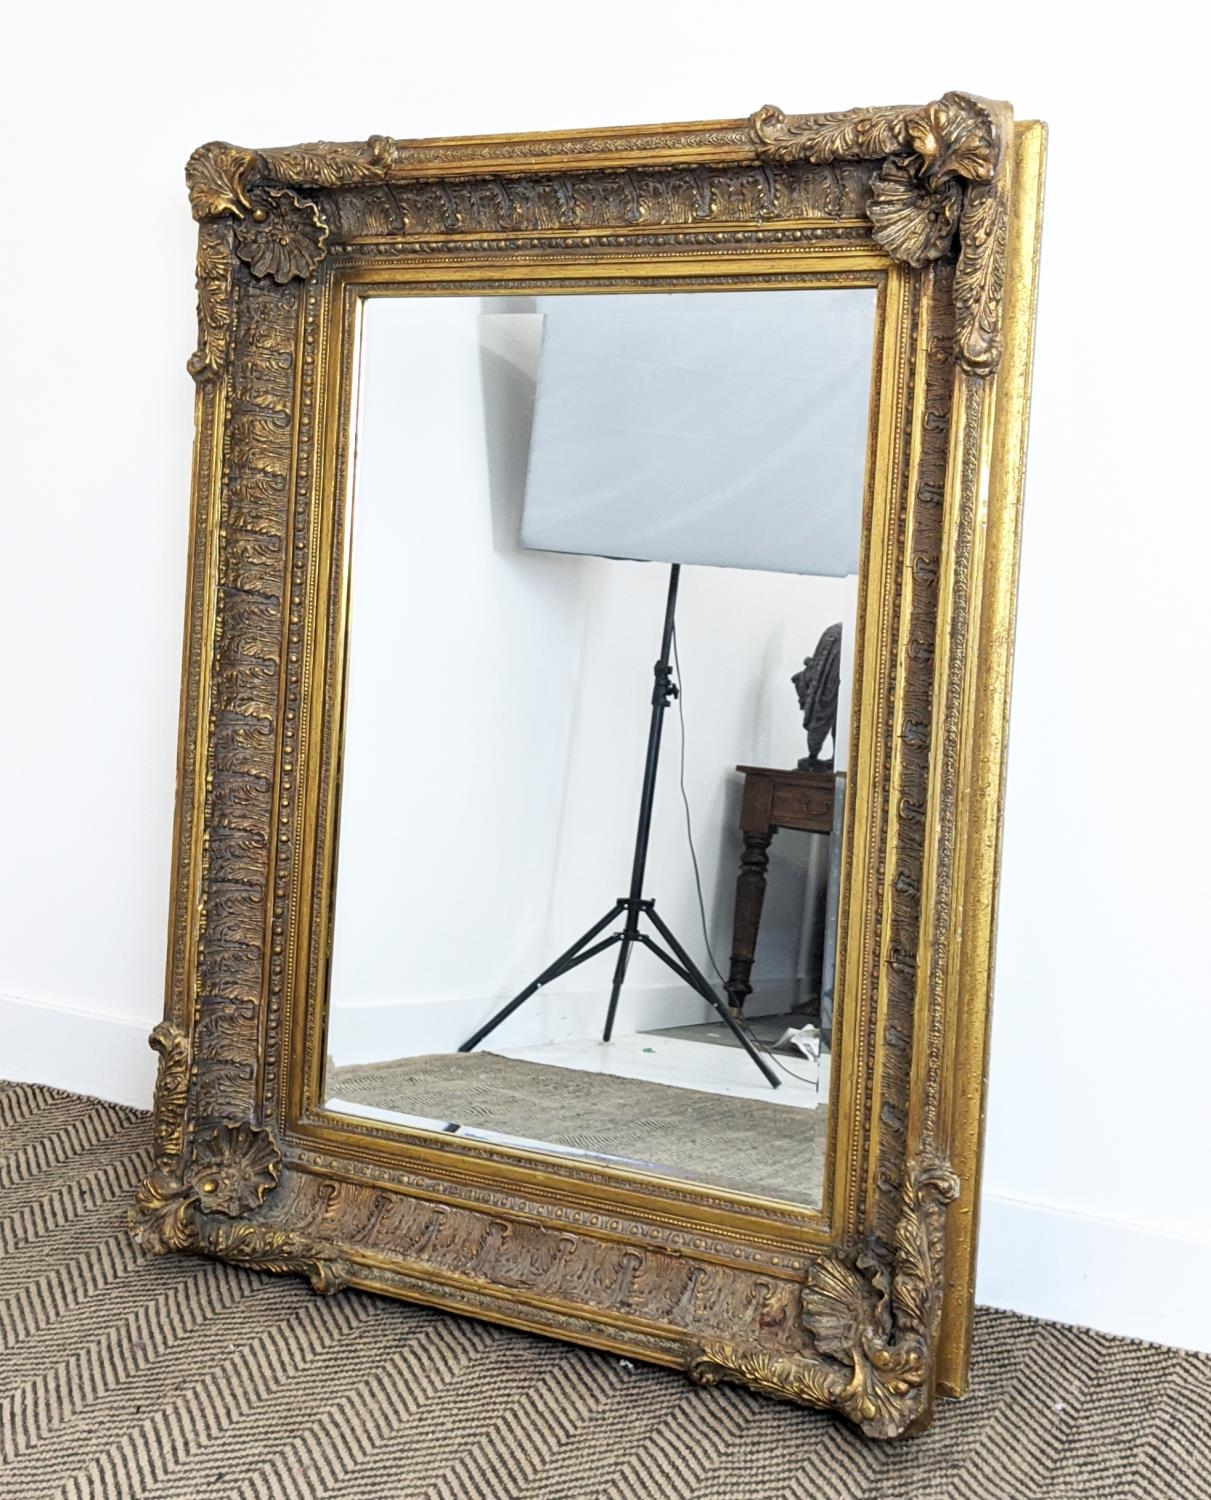 WALL MIRROR, 19th century style gilt framed with shell and leaf decoration, 121cm x 88cm. - Image 2 of 16